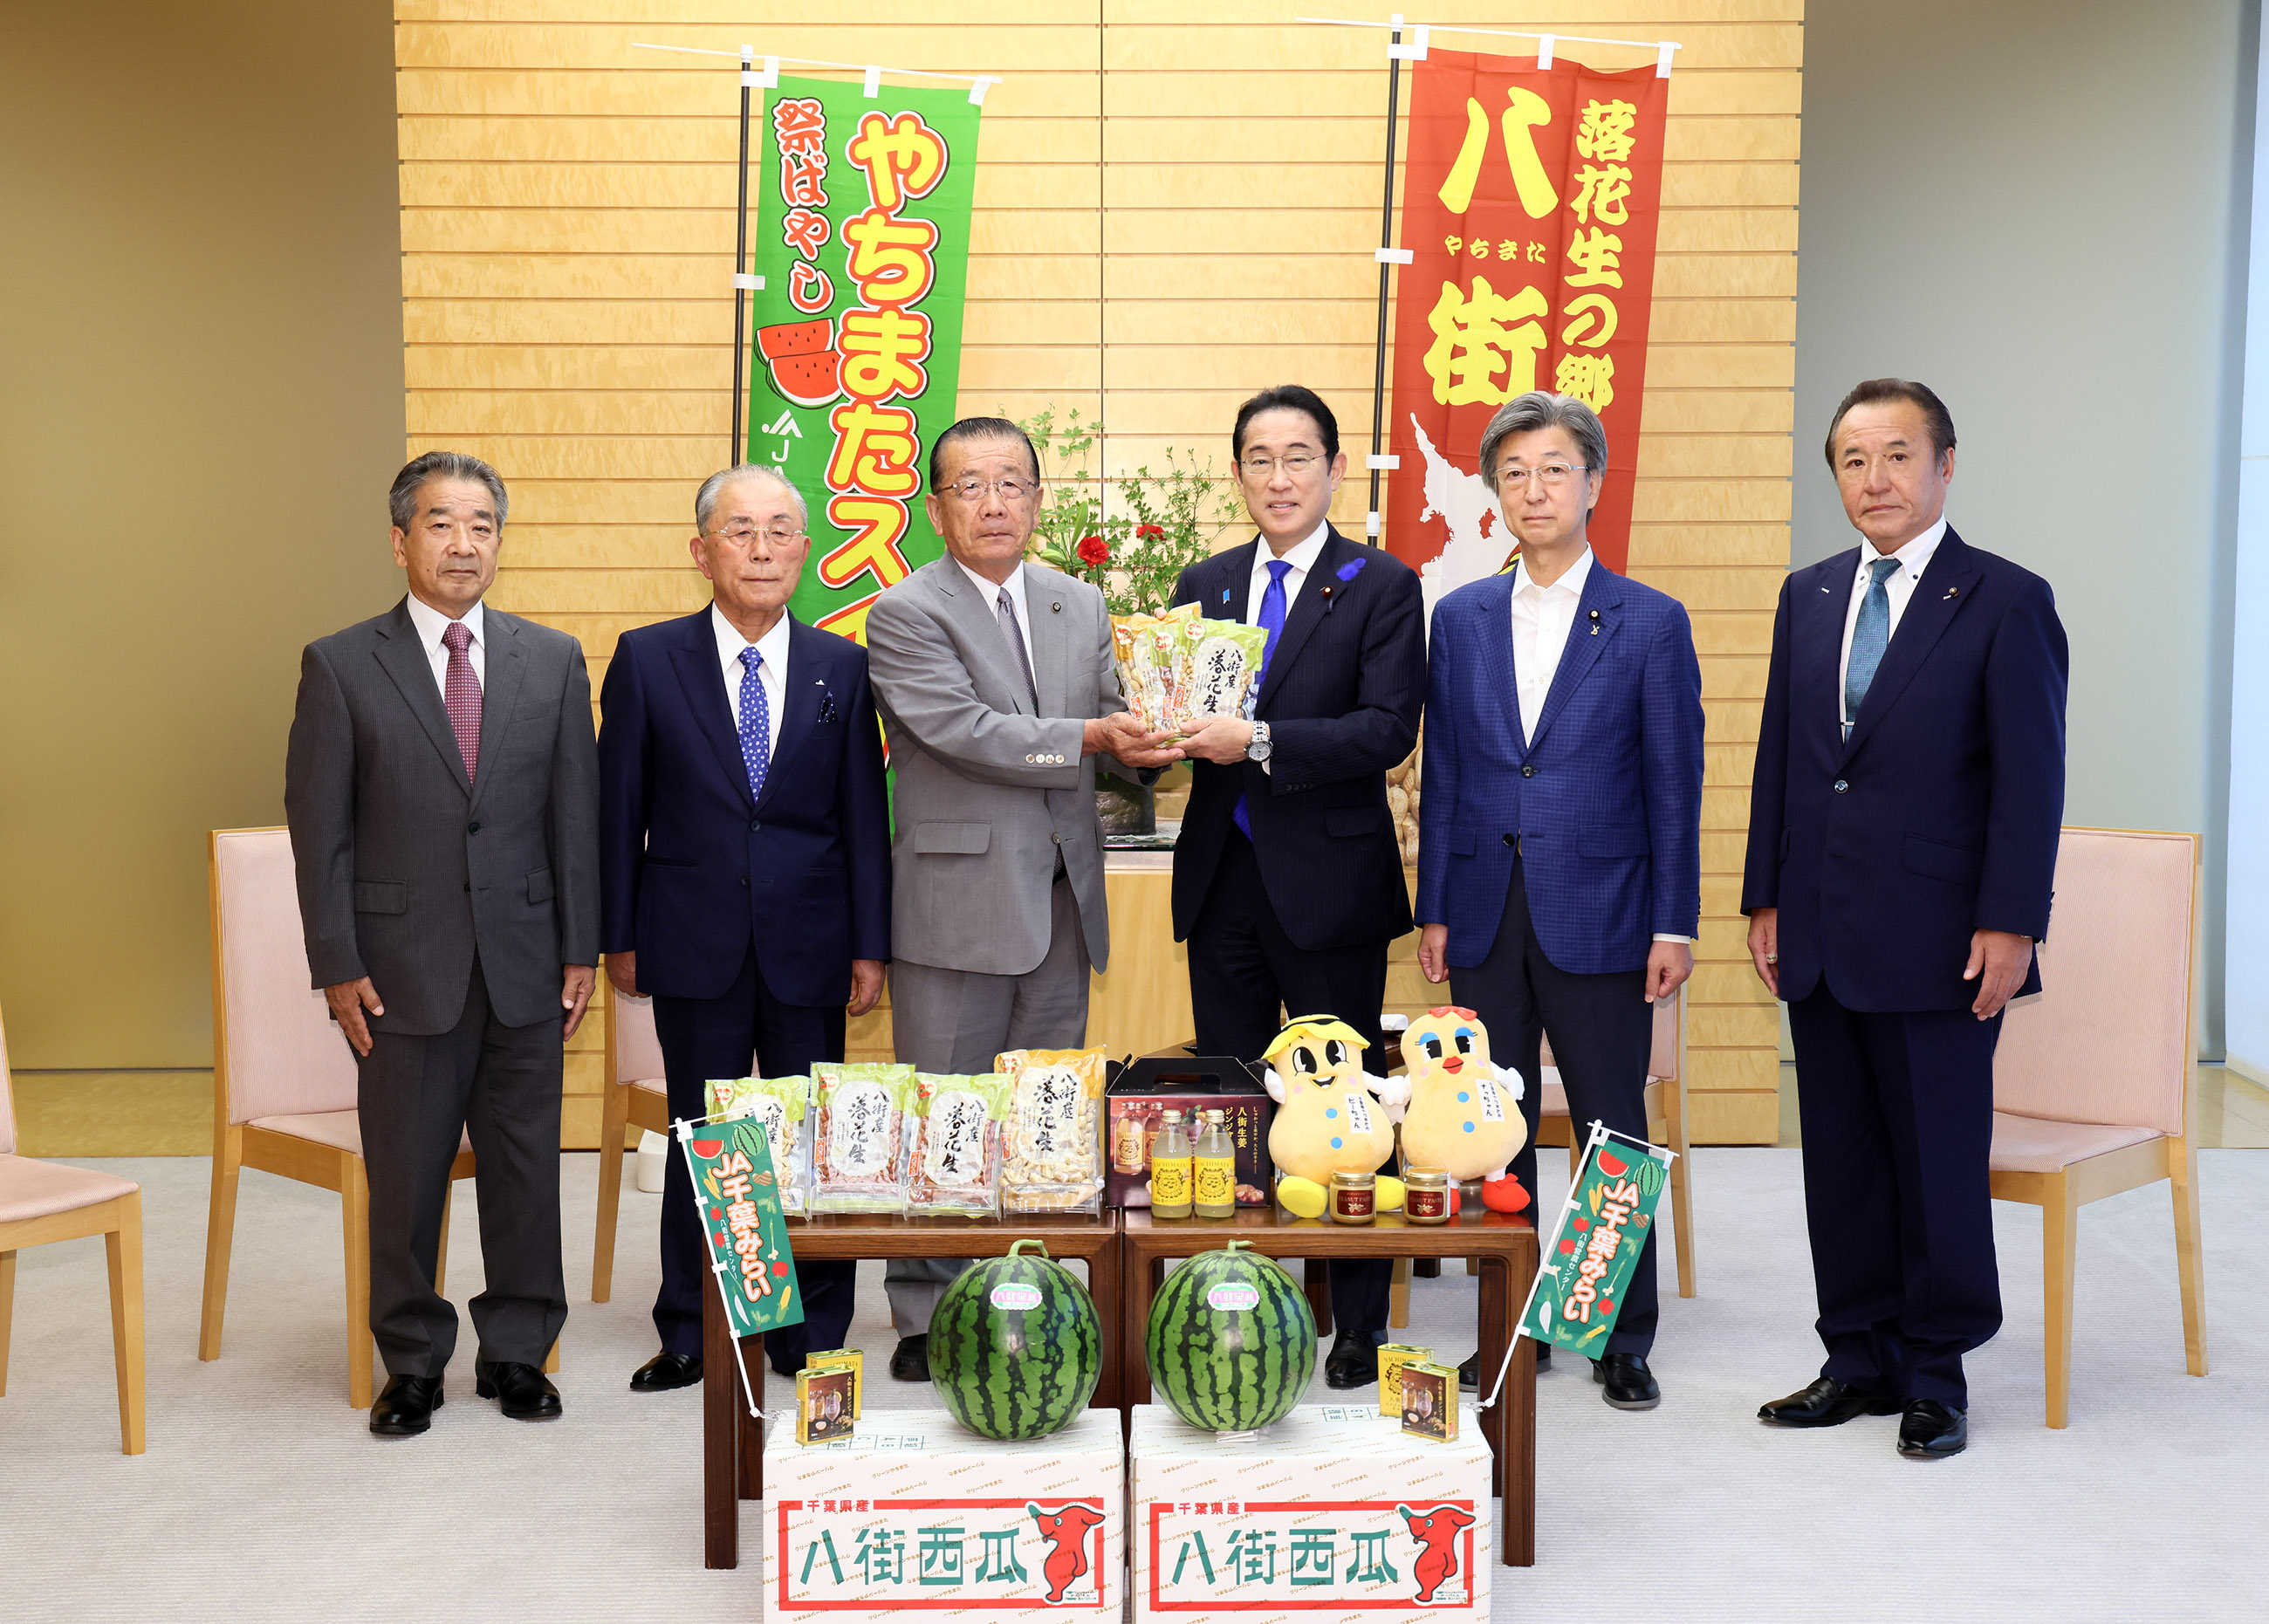 Prime Minister Kishida being presented with peanuts (1)